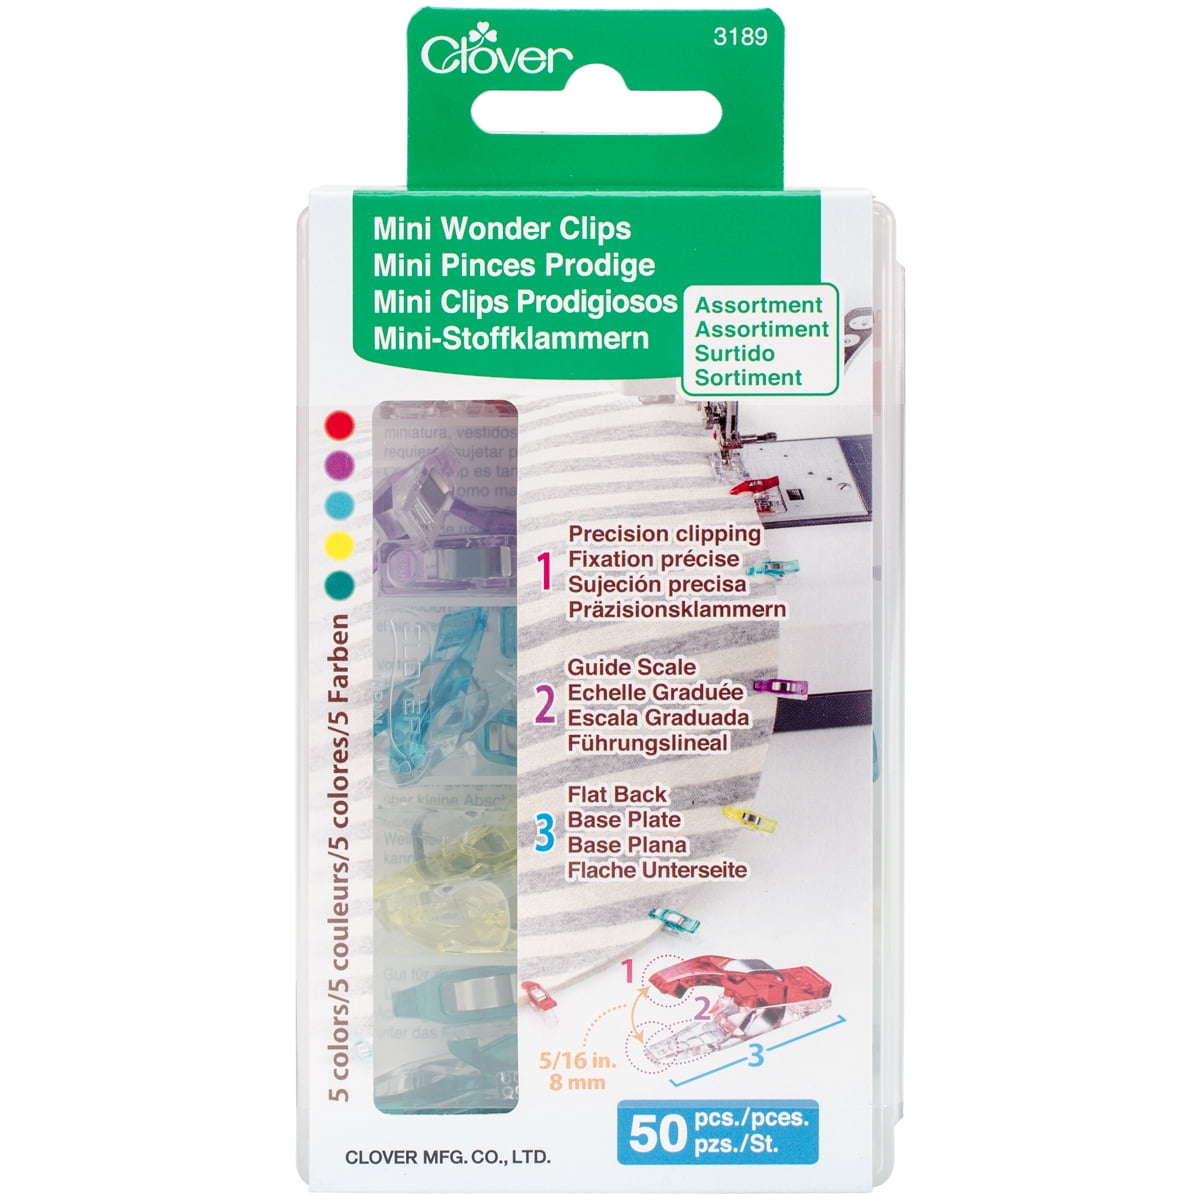 Clover Rainbow Wonder Clips - 10 pcs - Clips - Marking Tools - Notions